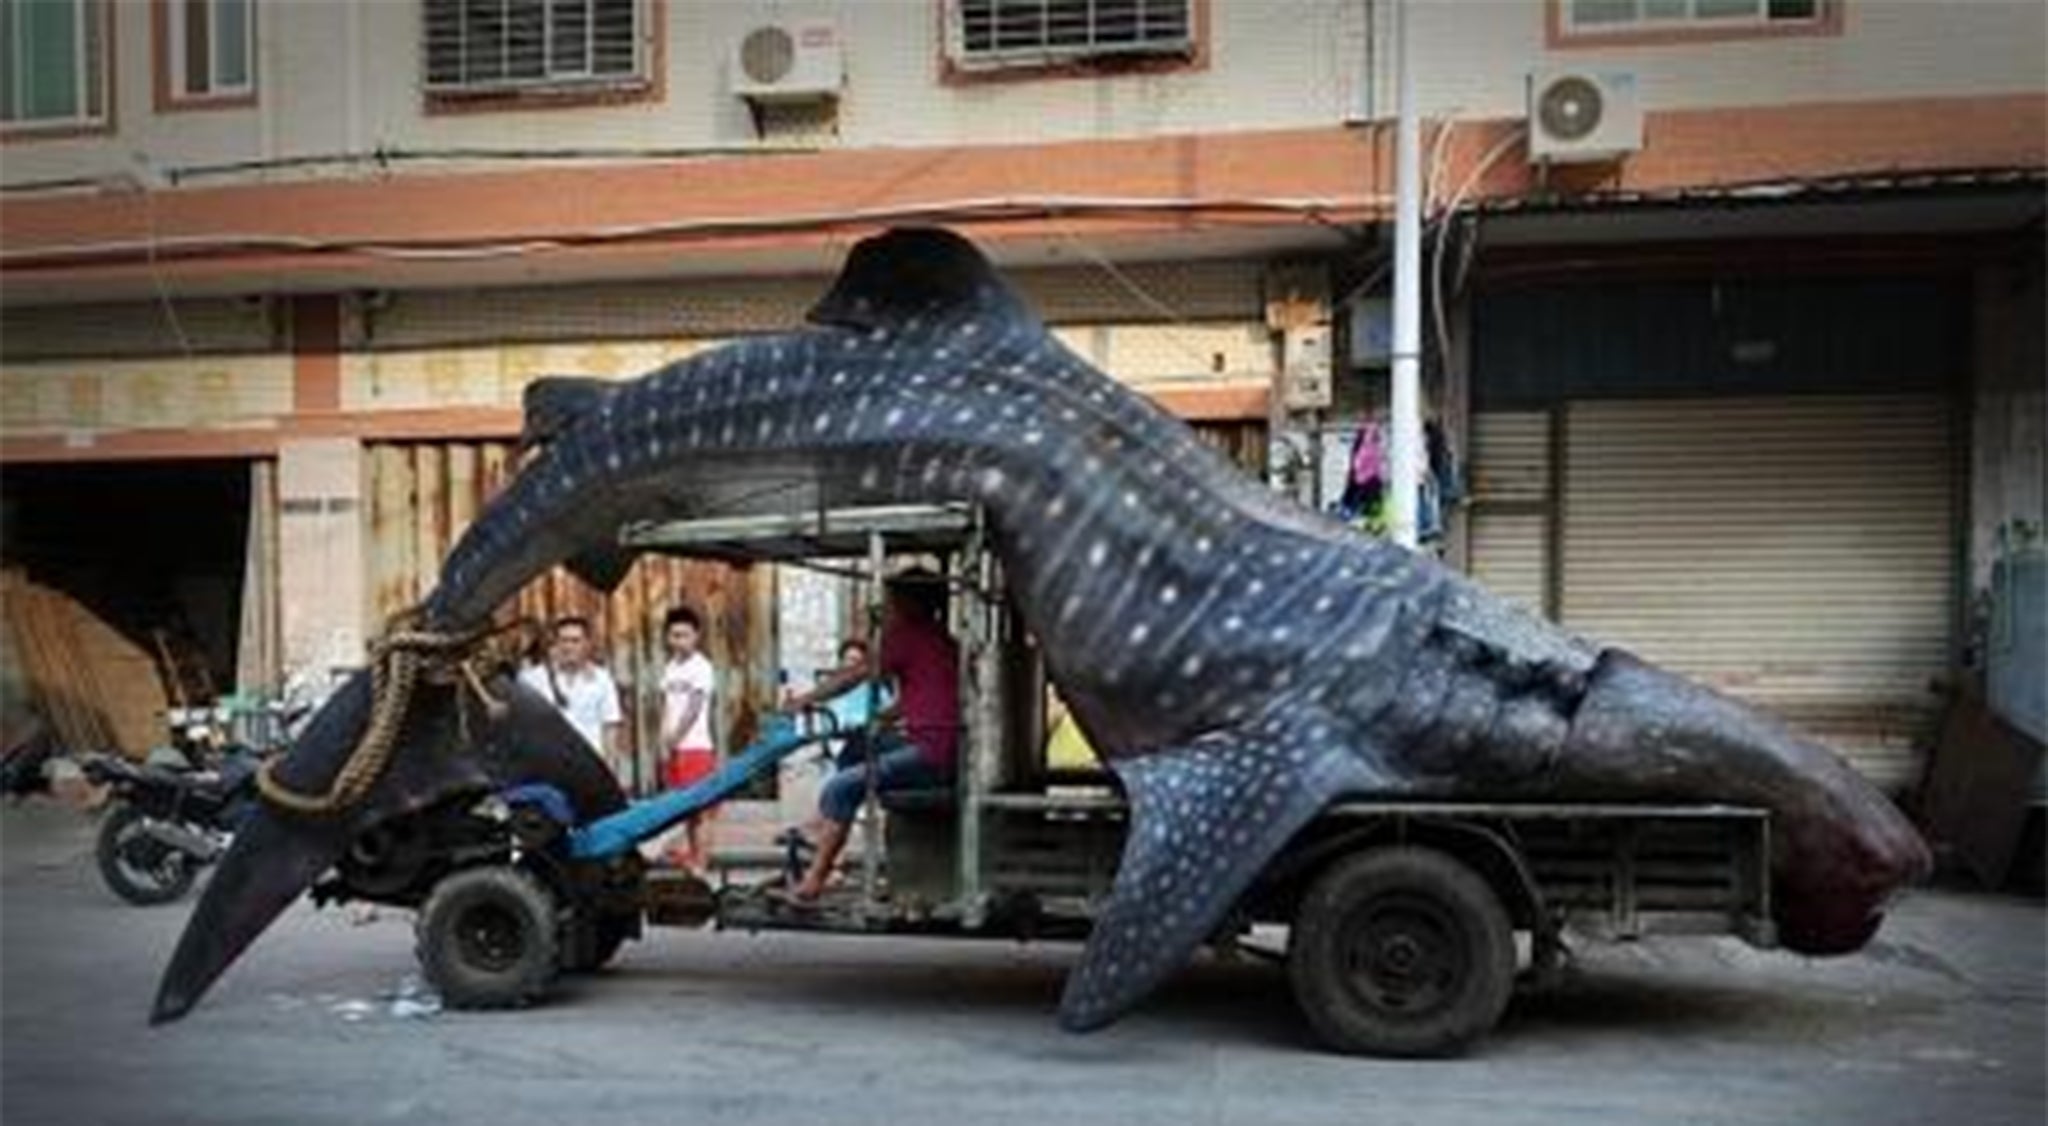 The fisherman said he was unaware that what he had caught was an endangered - and protected - whale shark